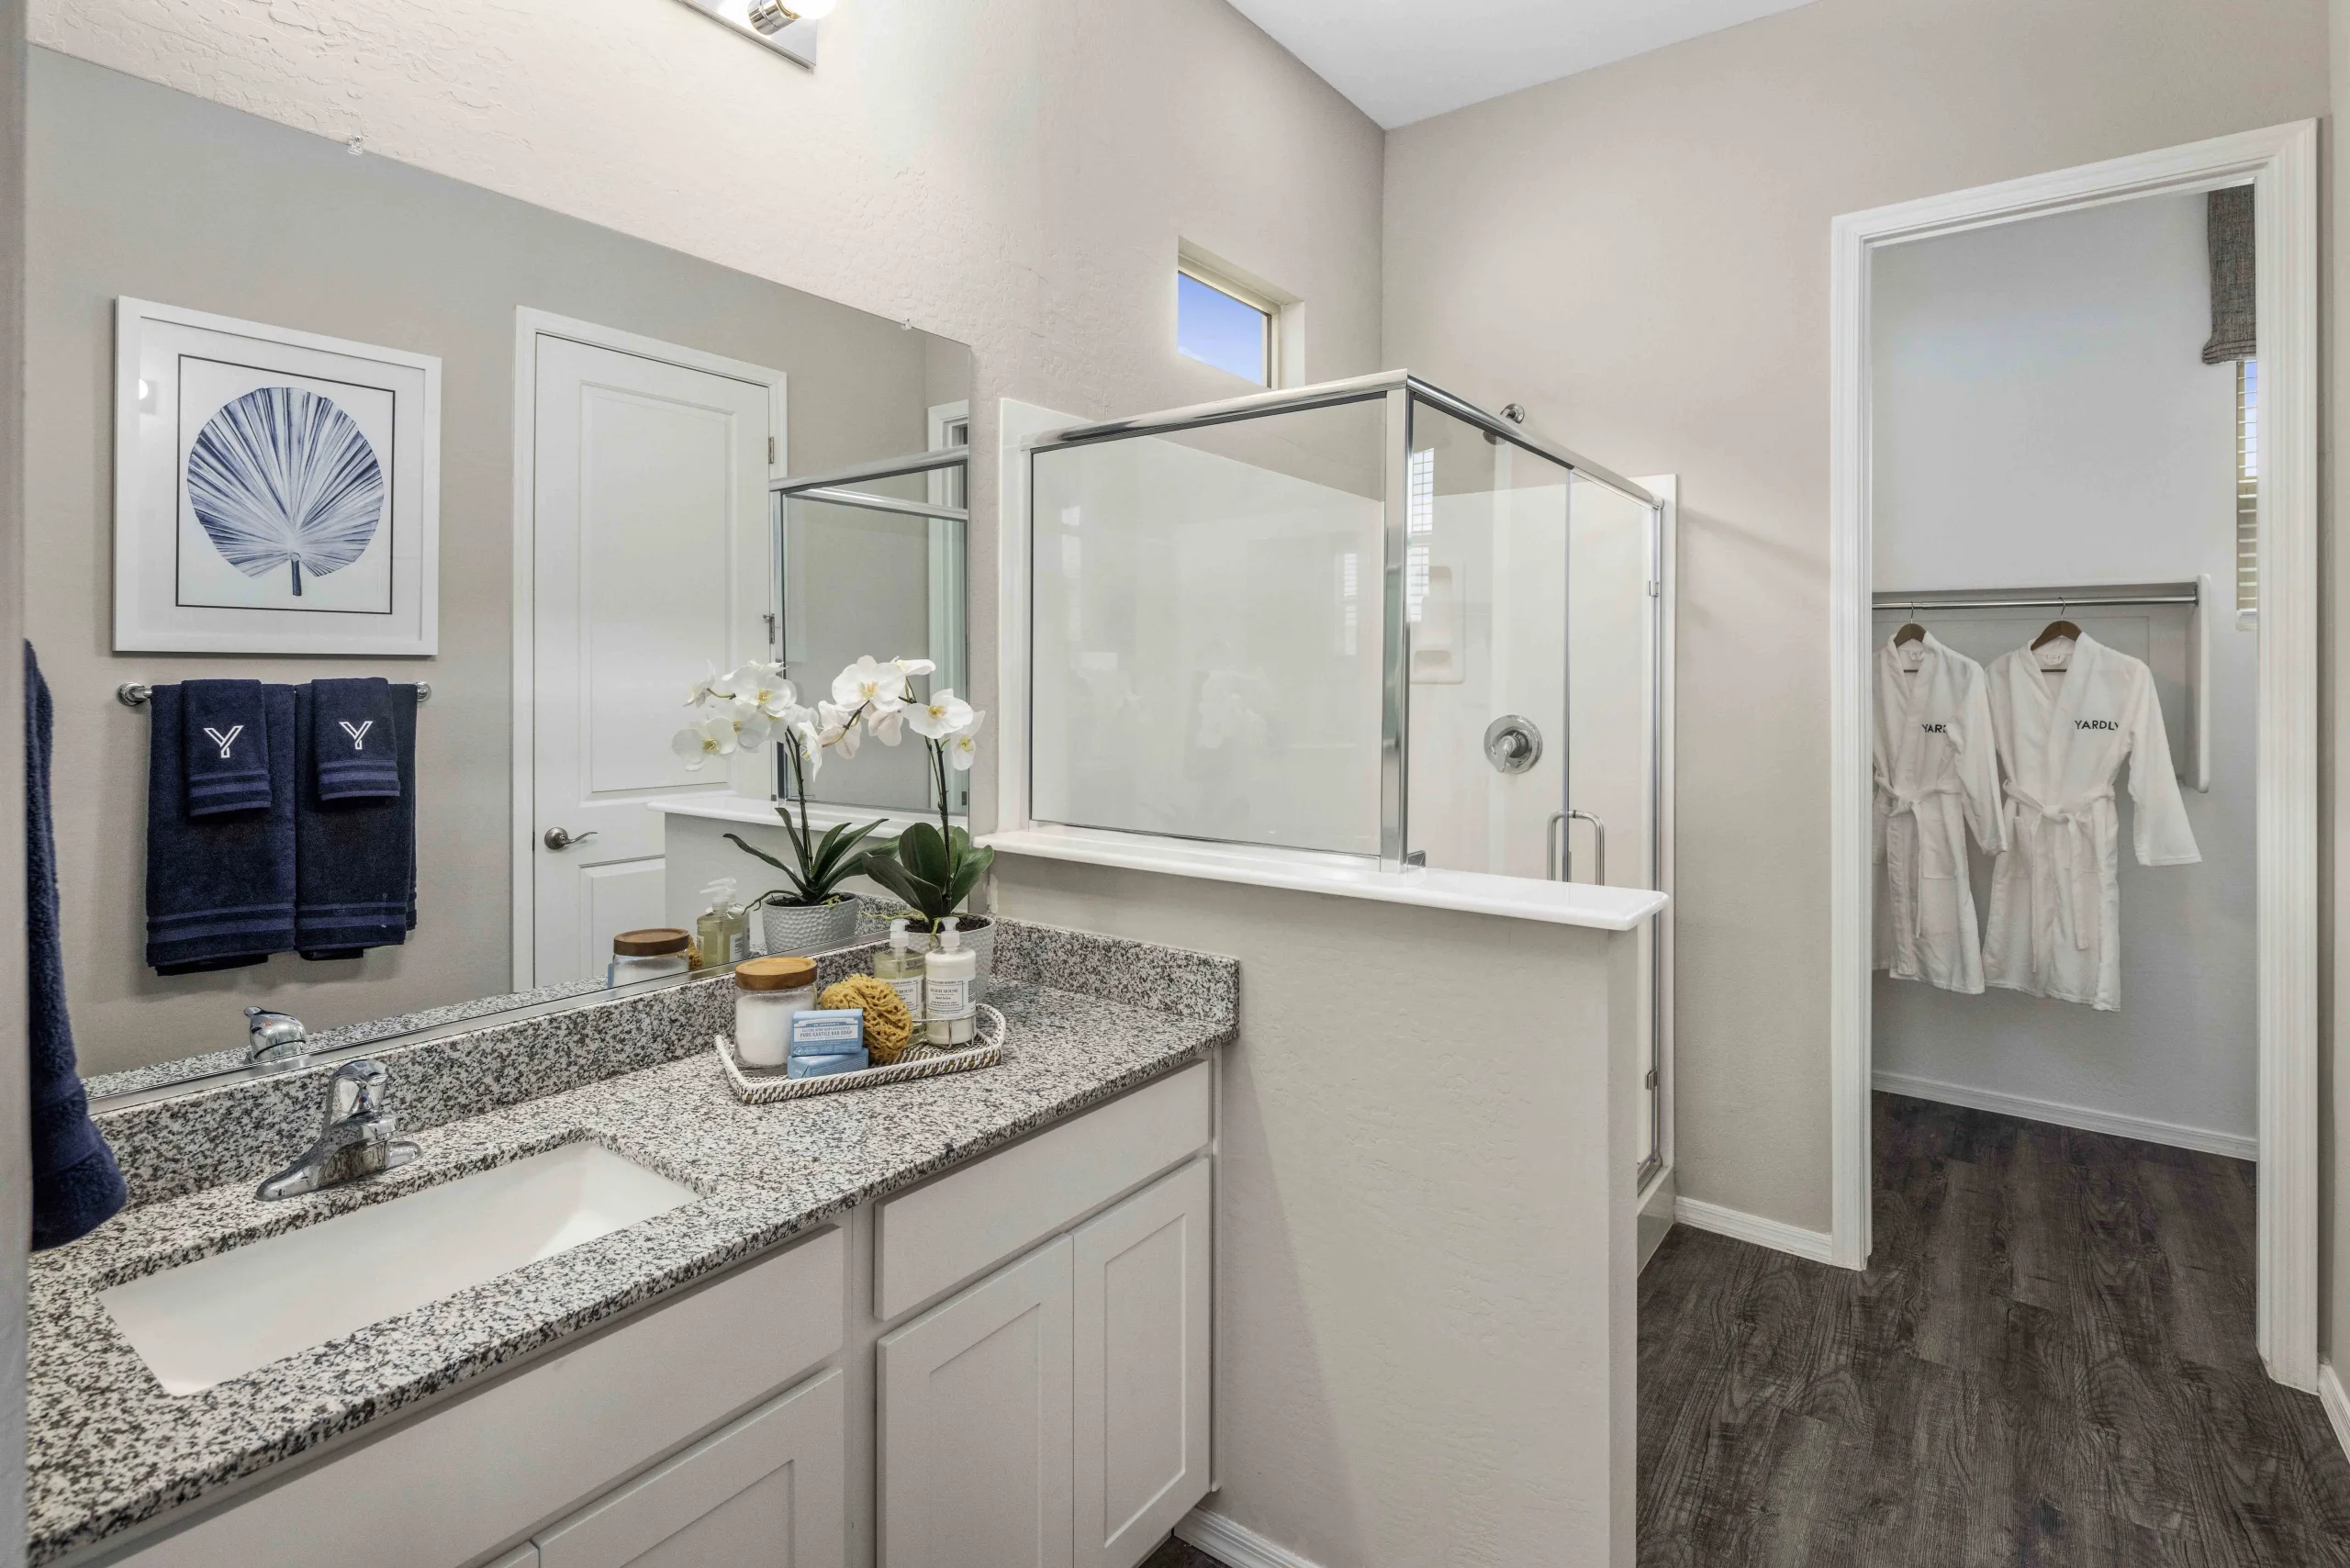 Primary bathroom with walk-in shower and walk-in closet and single vanity sink with plenty of counter space.